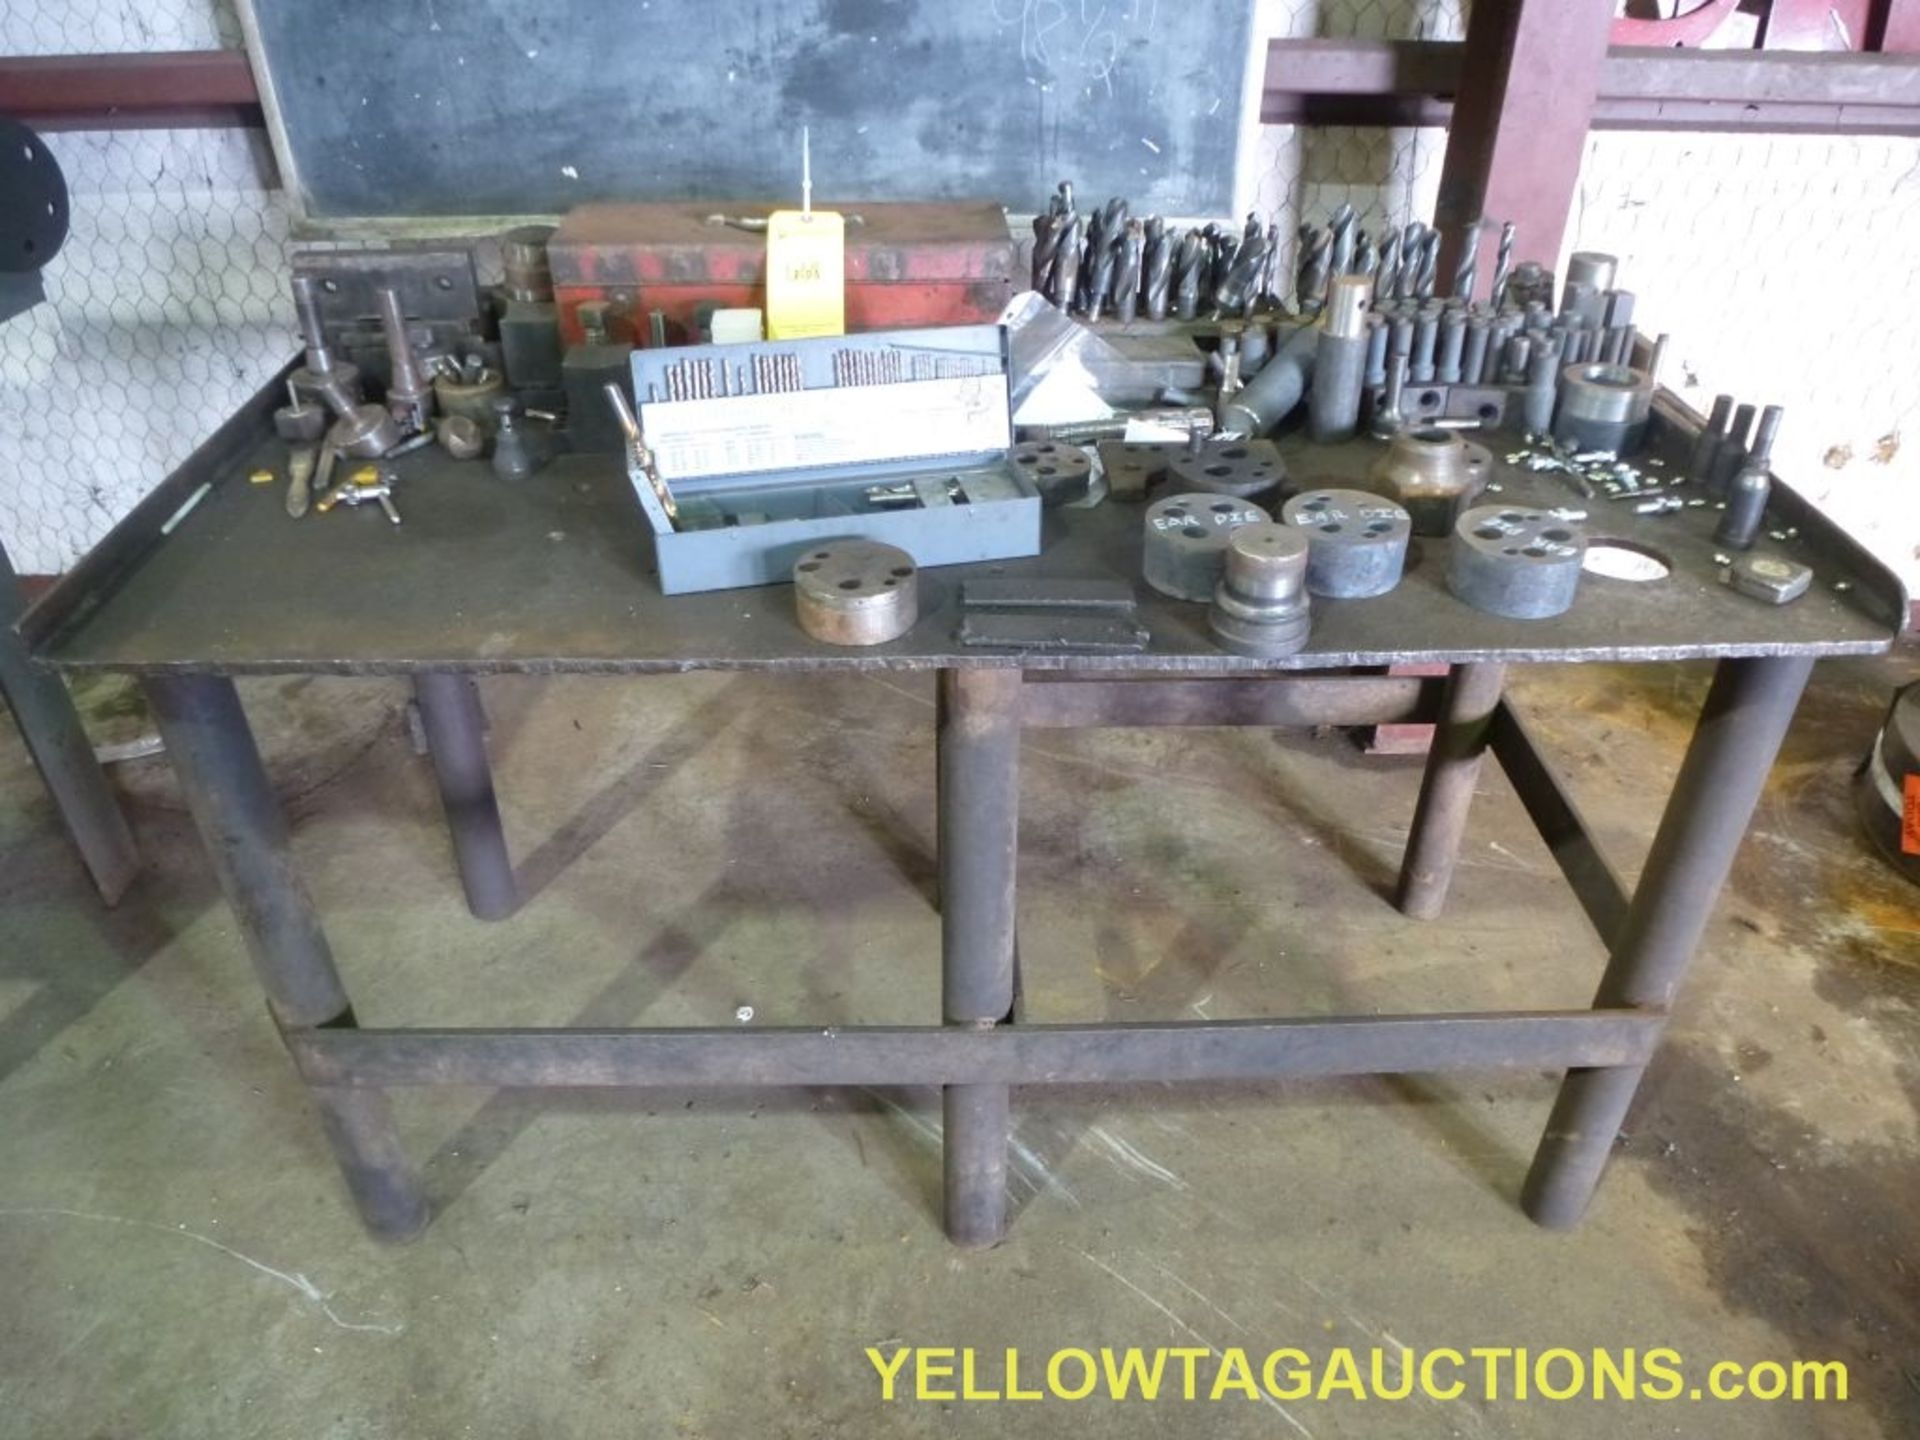 Metal Work Table with Contents|Includes: Drill Bits, Dies|Tag: 668